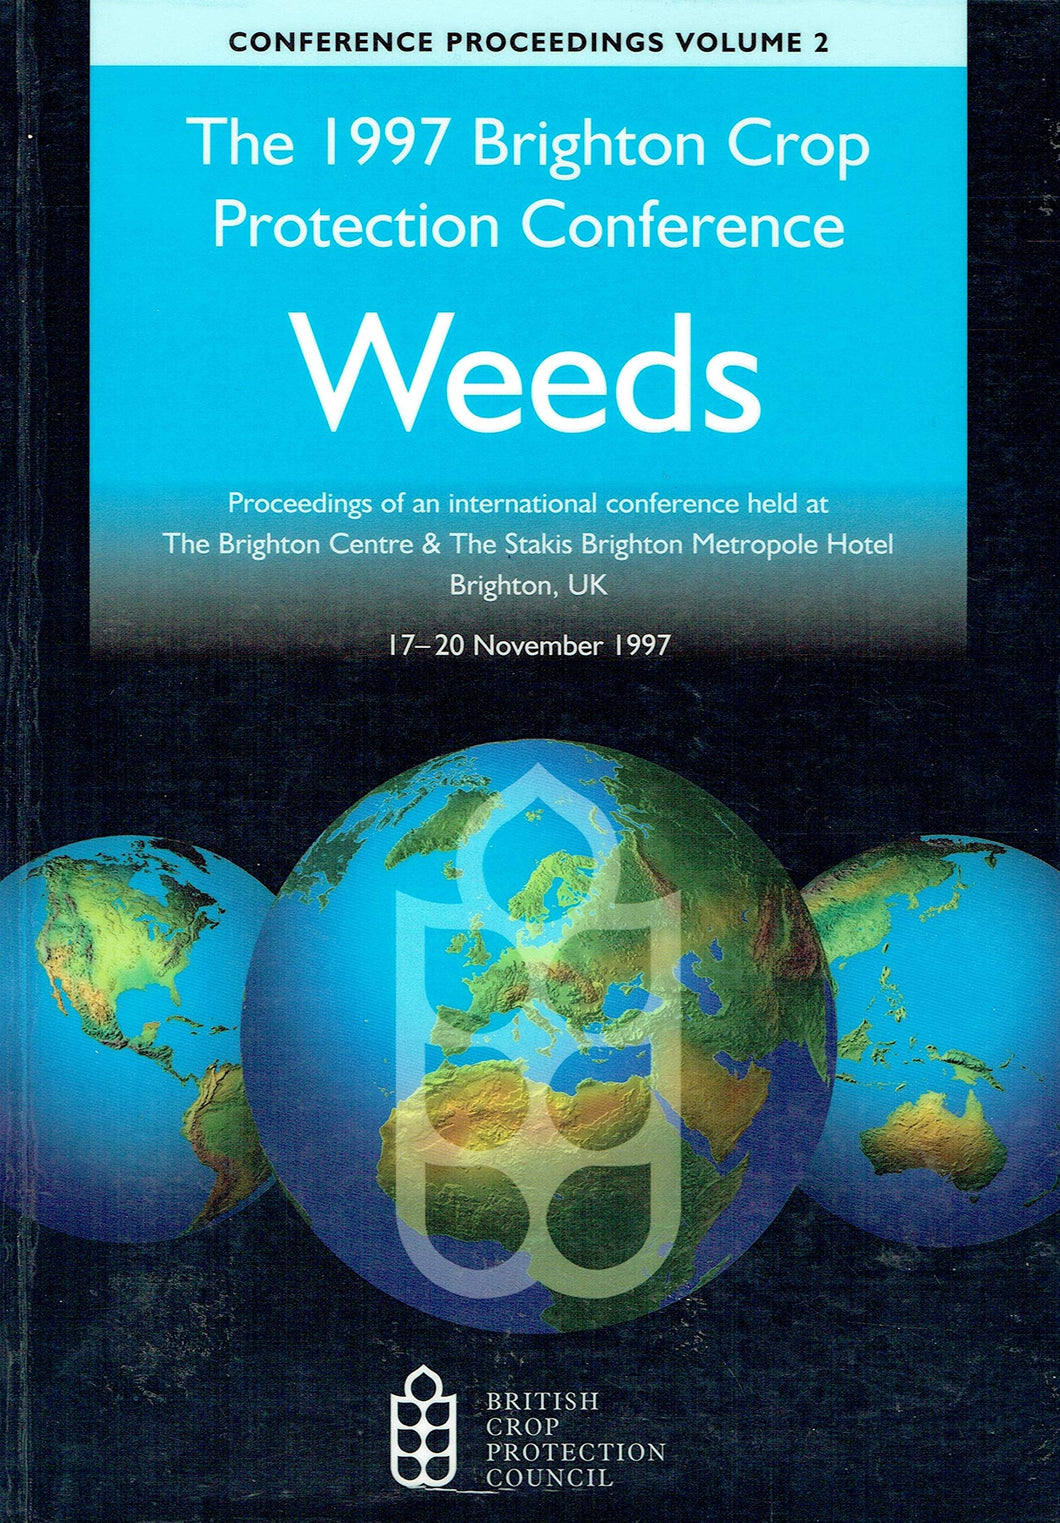 The 1997 Brighton Crop Protection Conference - Weeds (Volume 1): Proceedings of an international conference organised by the British Crop Protection Council